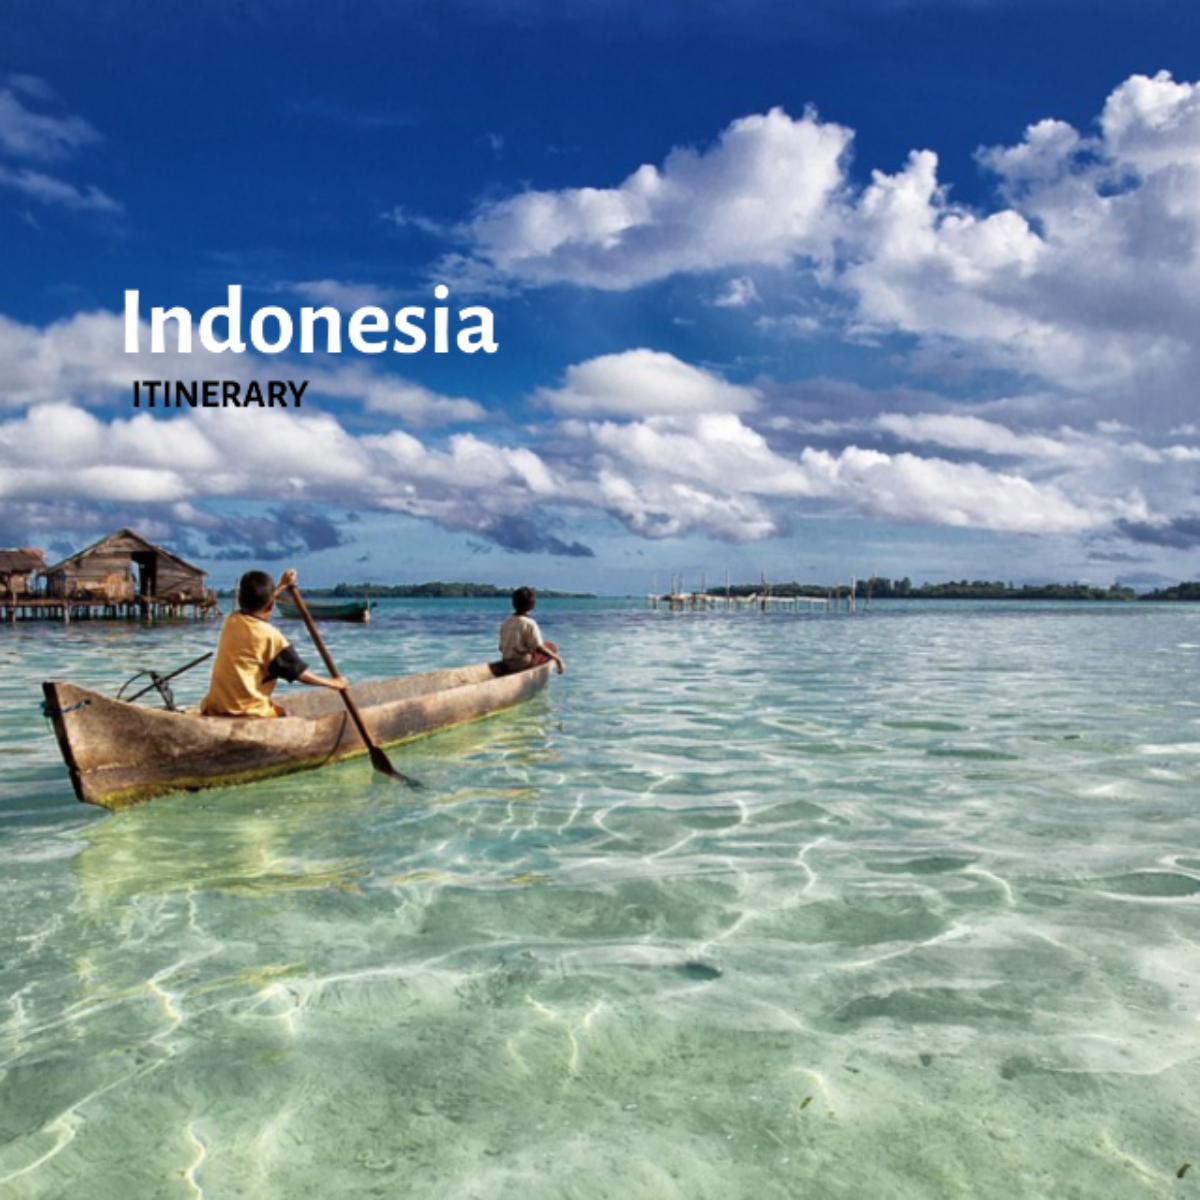 Indonesia Itinerary Template